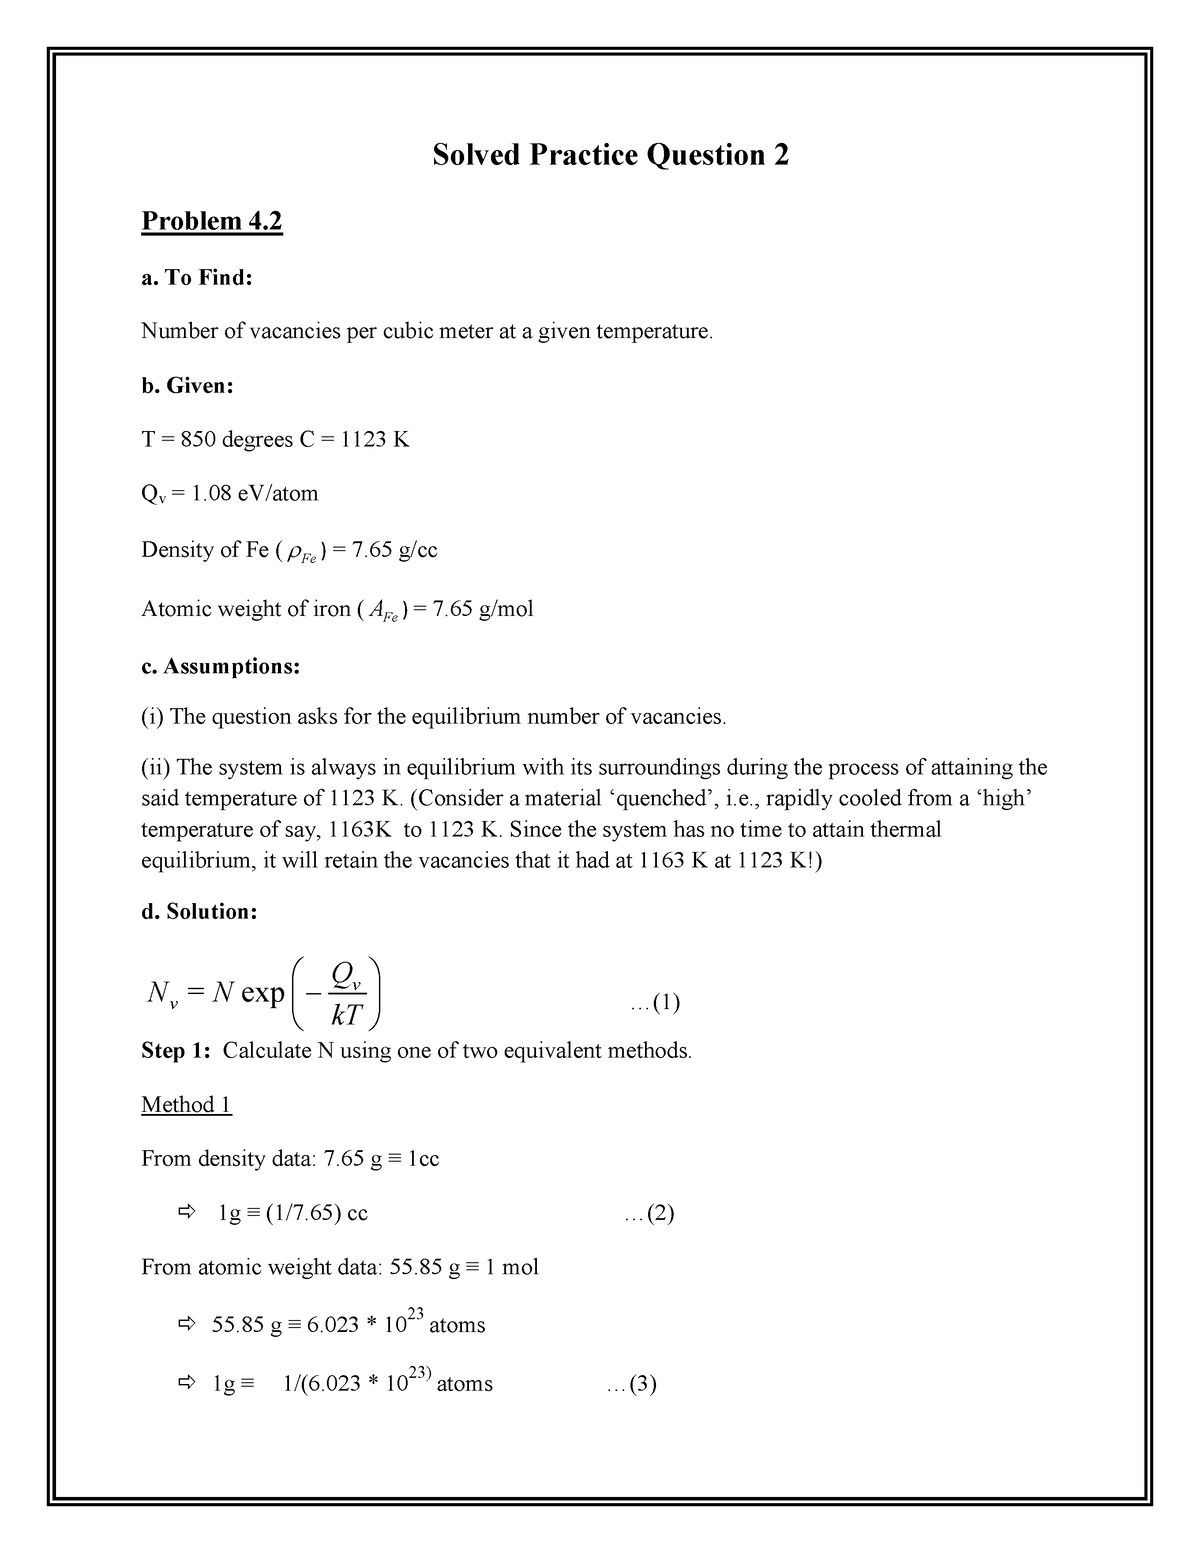 practice-2-notes-solved-practice-question-2-problem-4-a-to-find